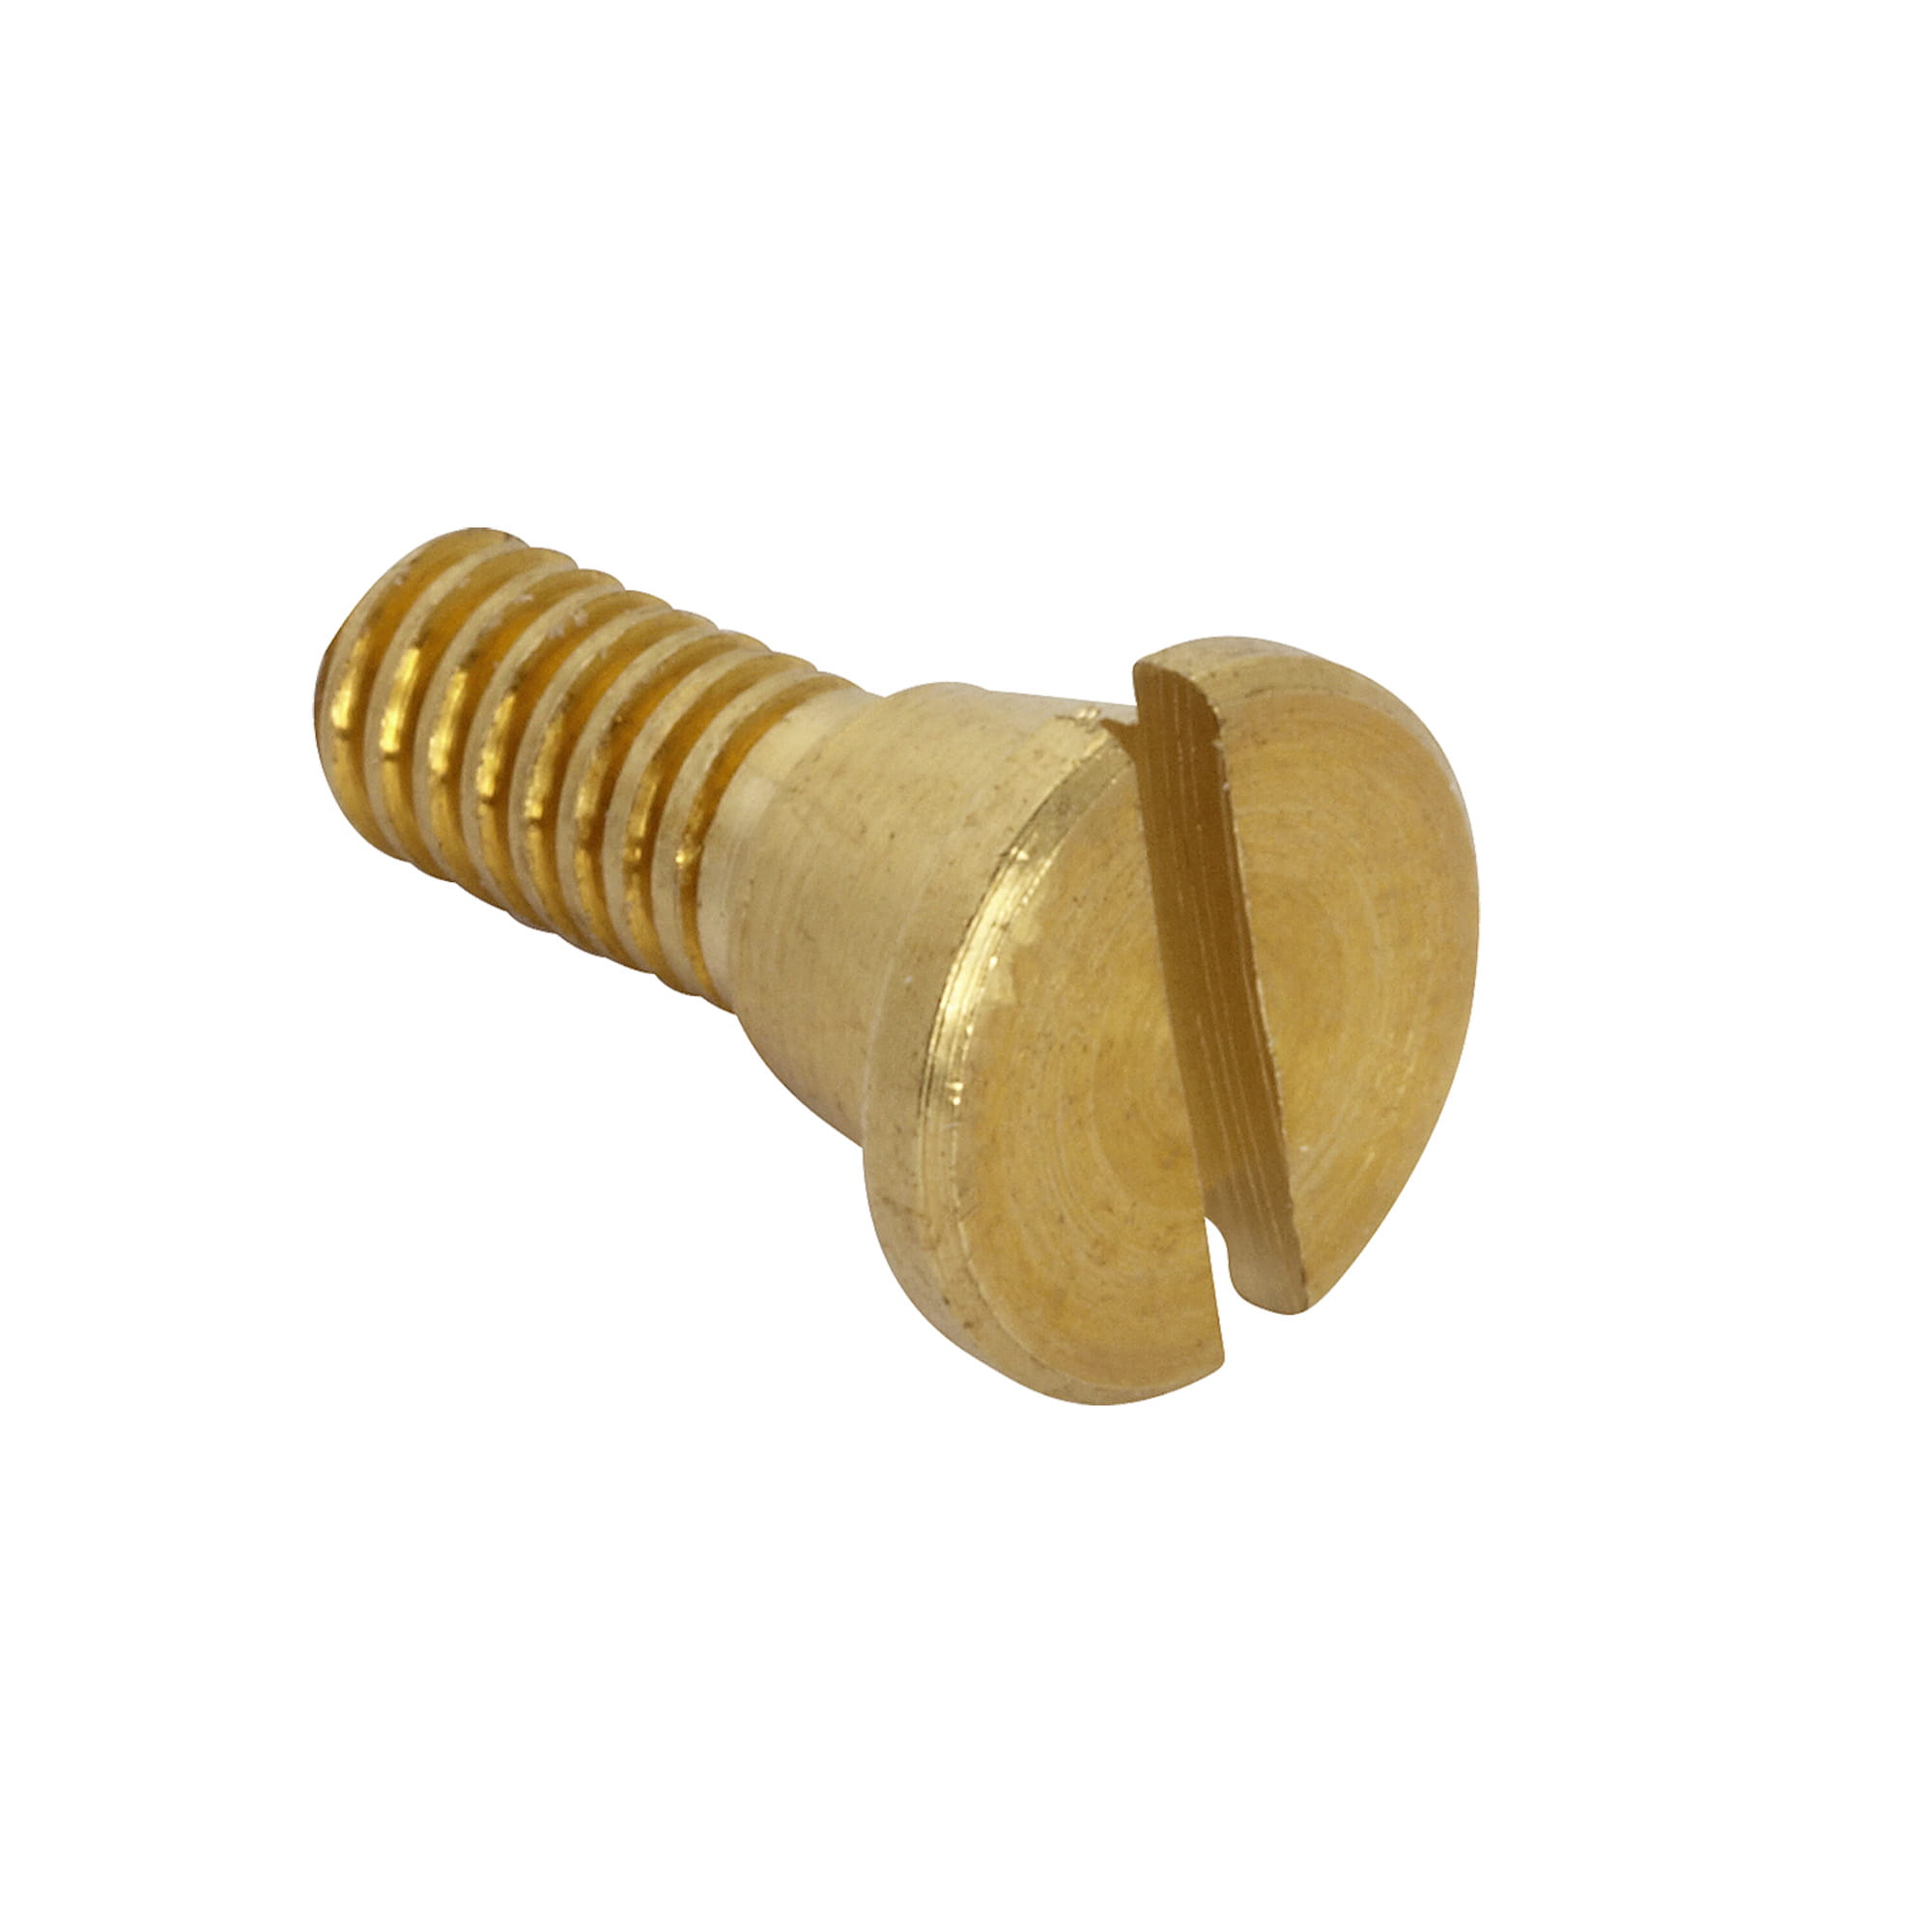 Bathroom and Laundy Faucet Handle Replacement Screw NO FINISH